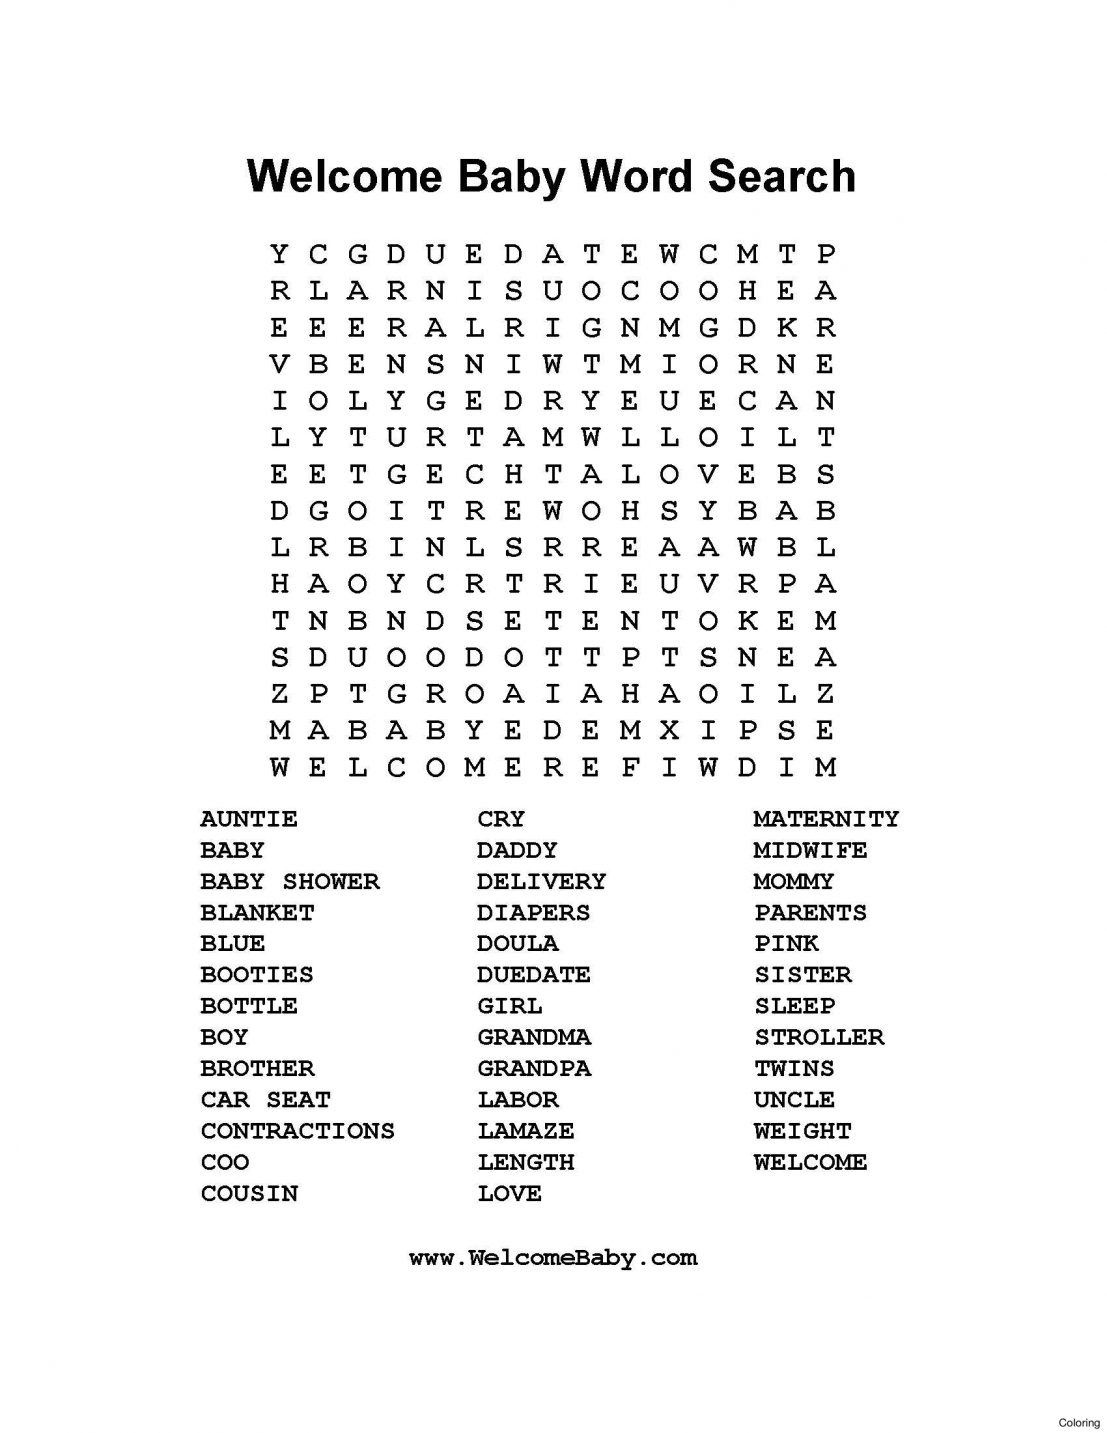 Free Crossword Puzzle Maker Printable - Hashtag Bg - Free Crossword - Printable Computer Crossword Puzzles With Answers